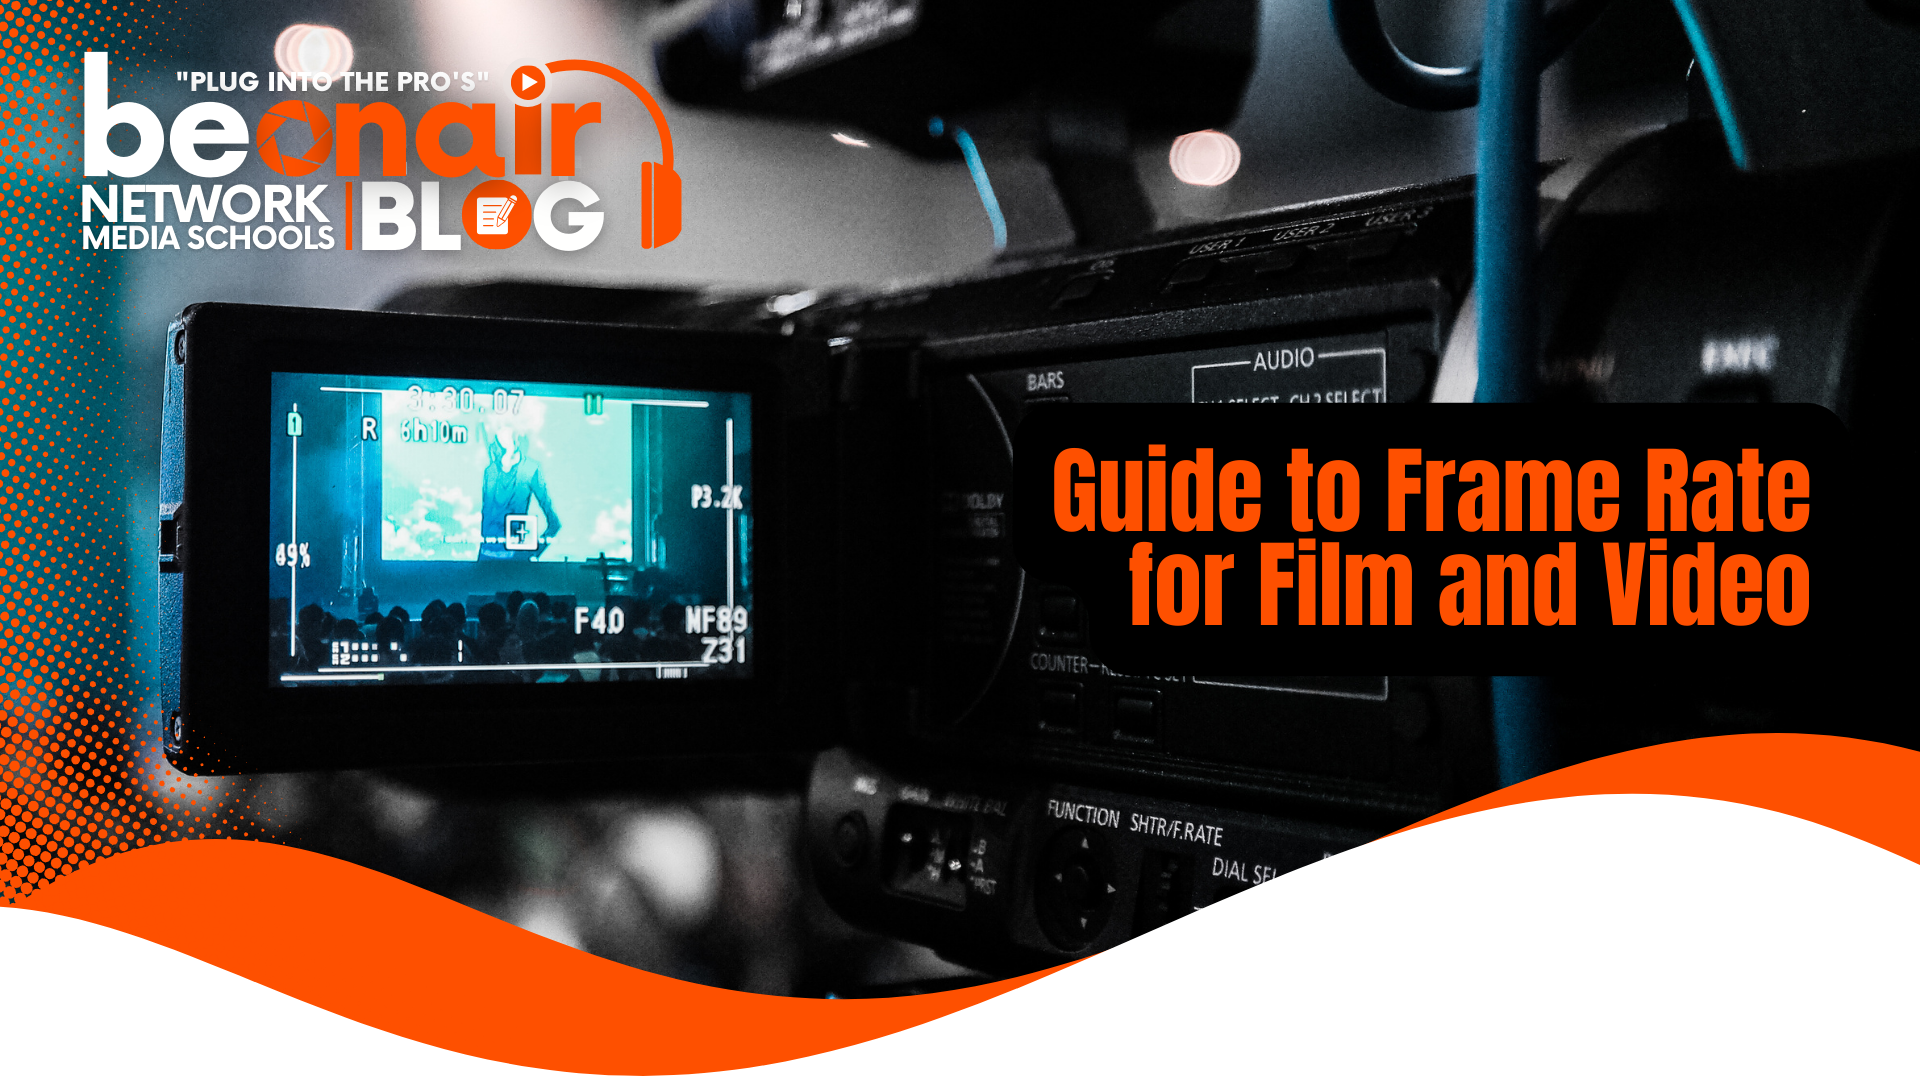 Guide to Frame Rate for Film and Video